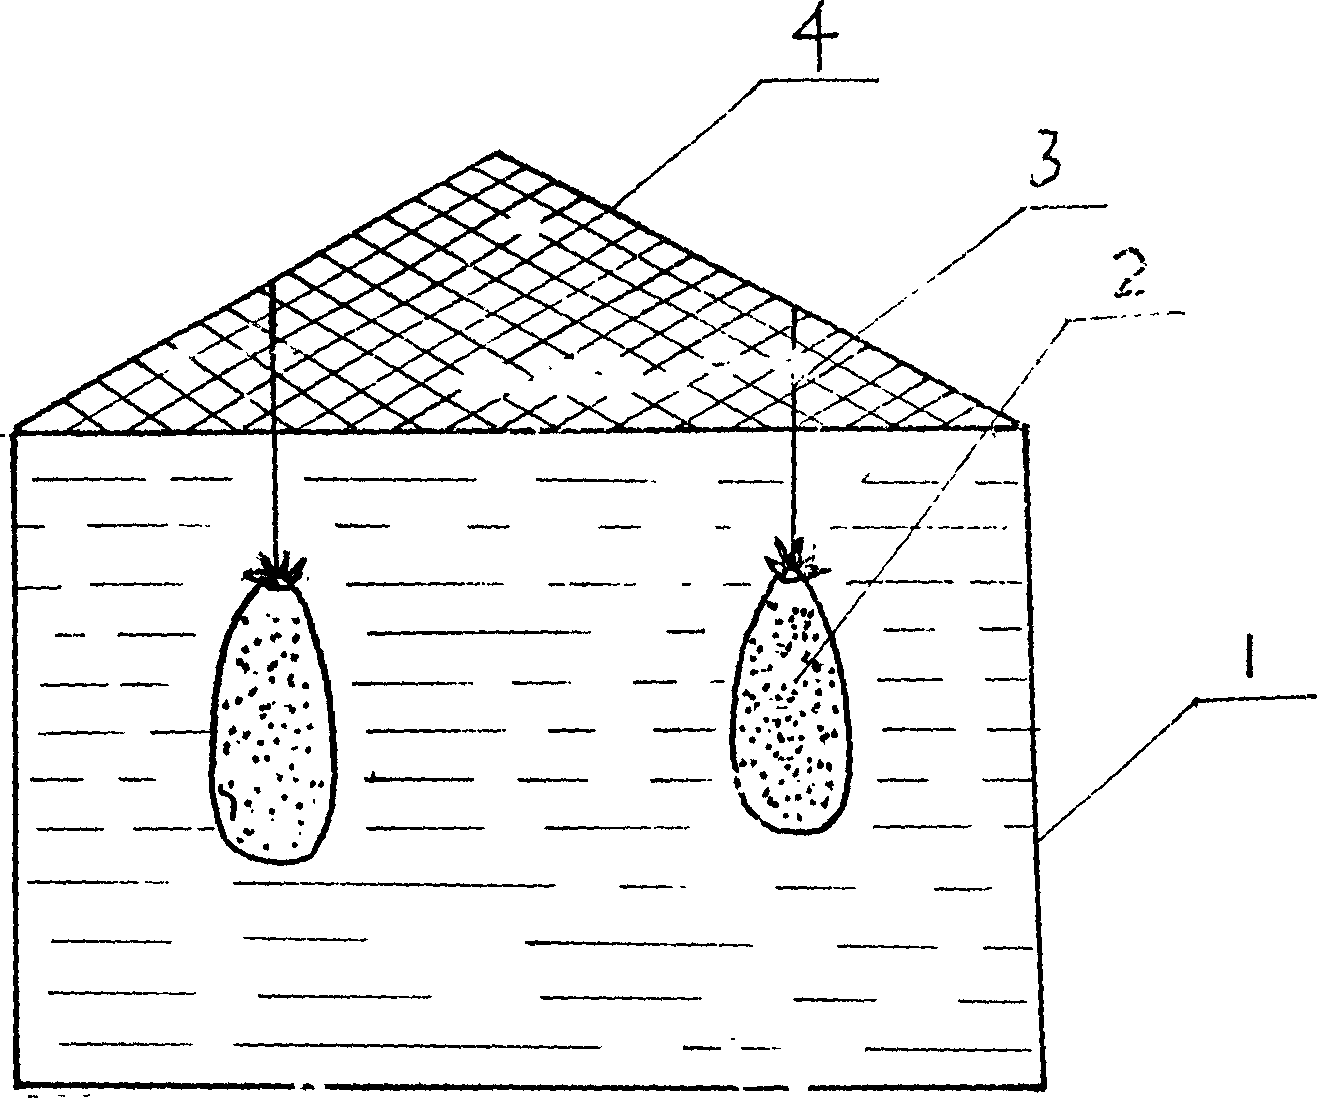 Filter fish feed and farming method